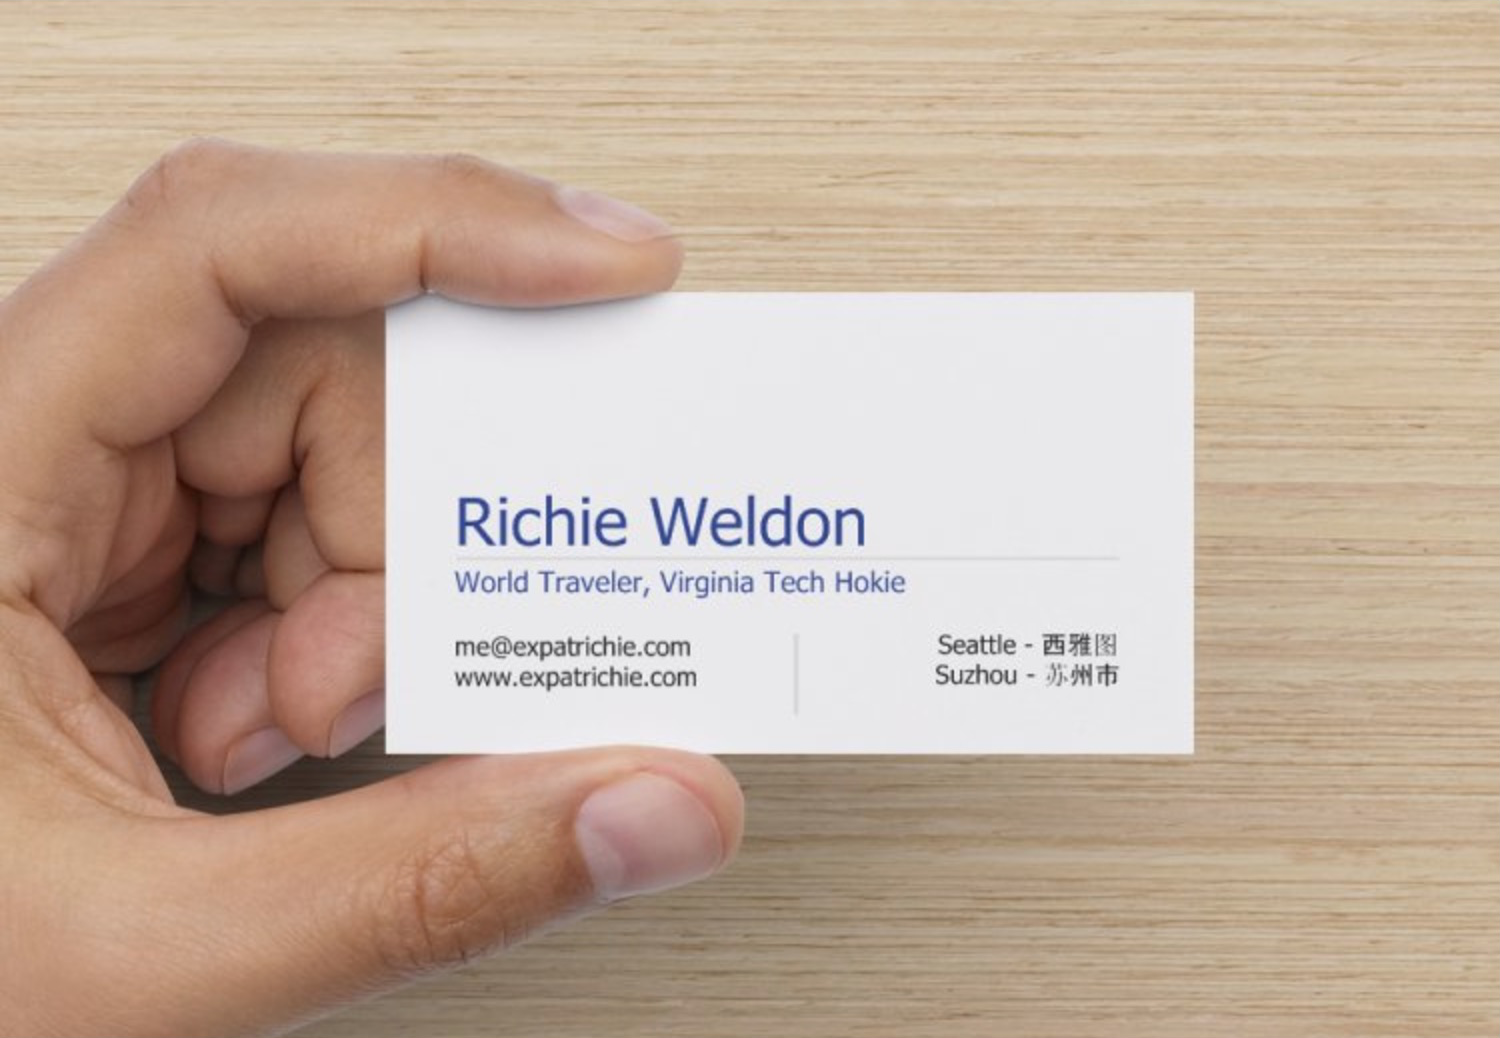 Picture of my personal business card